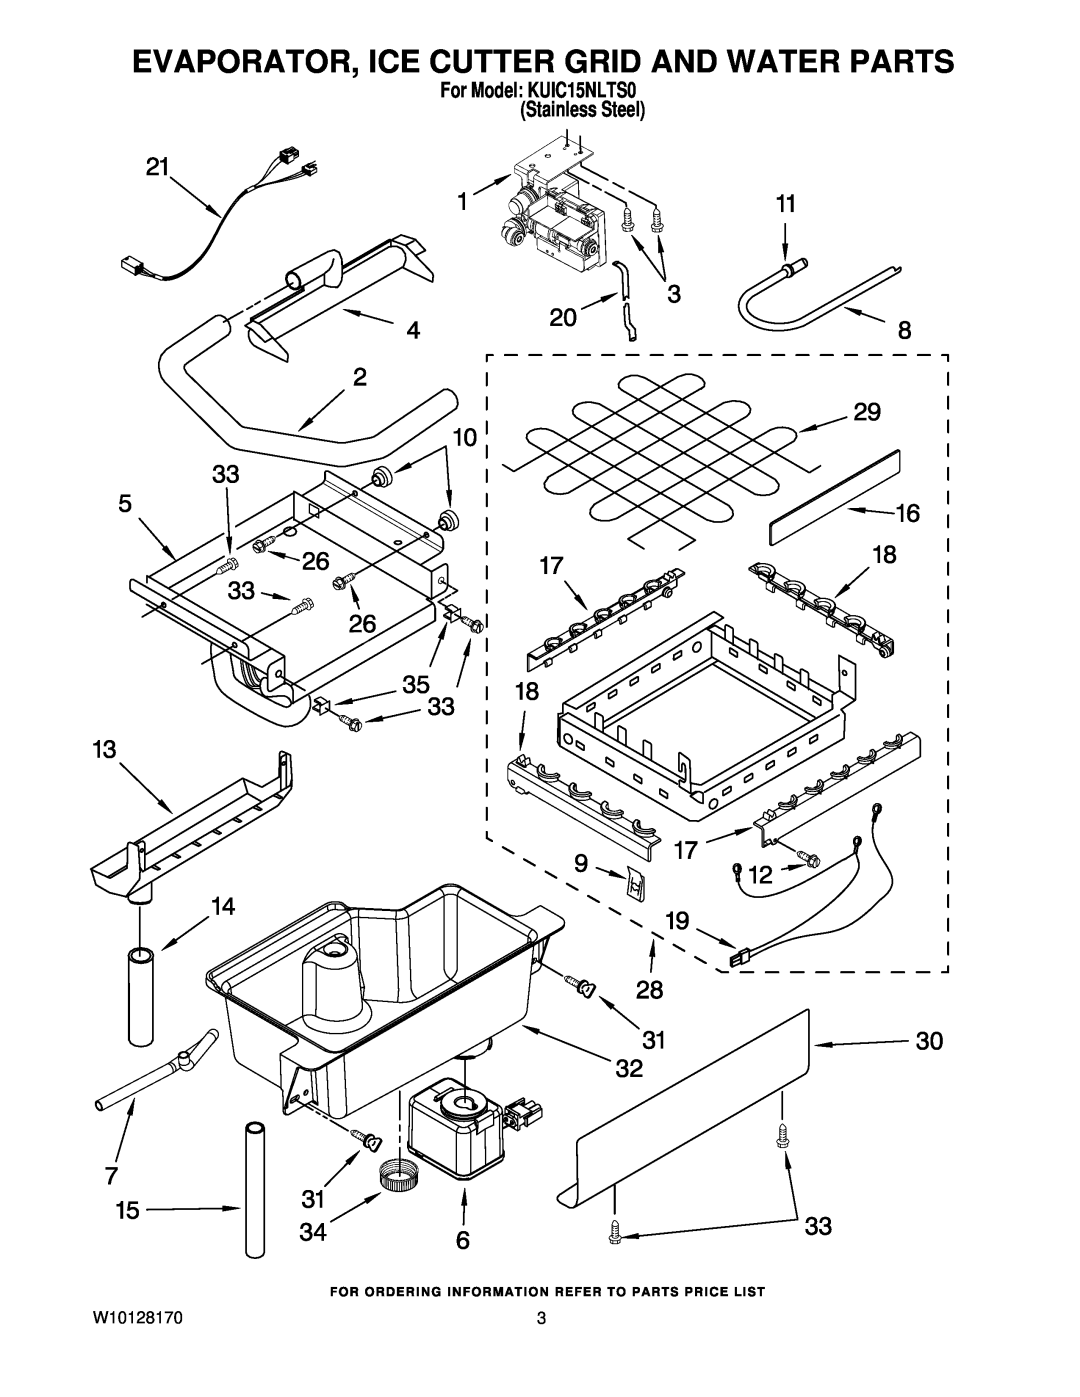 KitchenAid manual Evaporator, Ice Cutter Grid And Water Parts, W10128170, For Model KUIC15NLTS0 Stainless Steel 